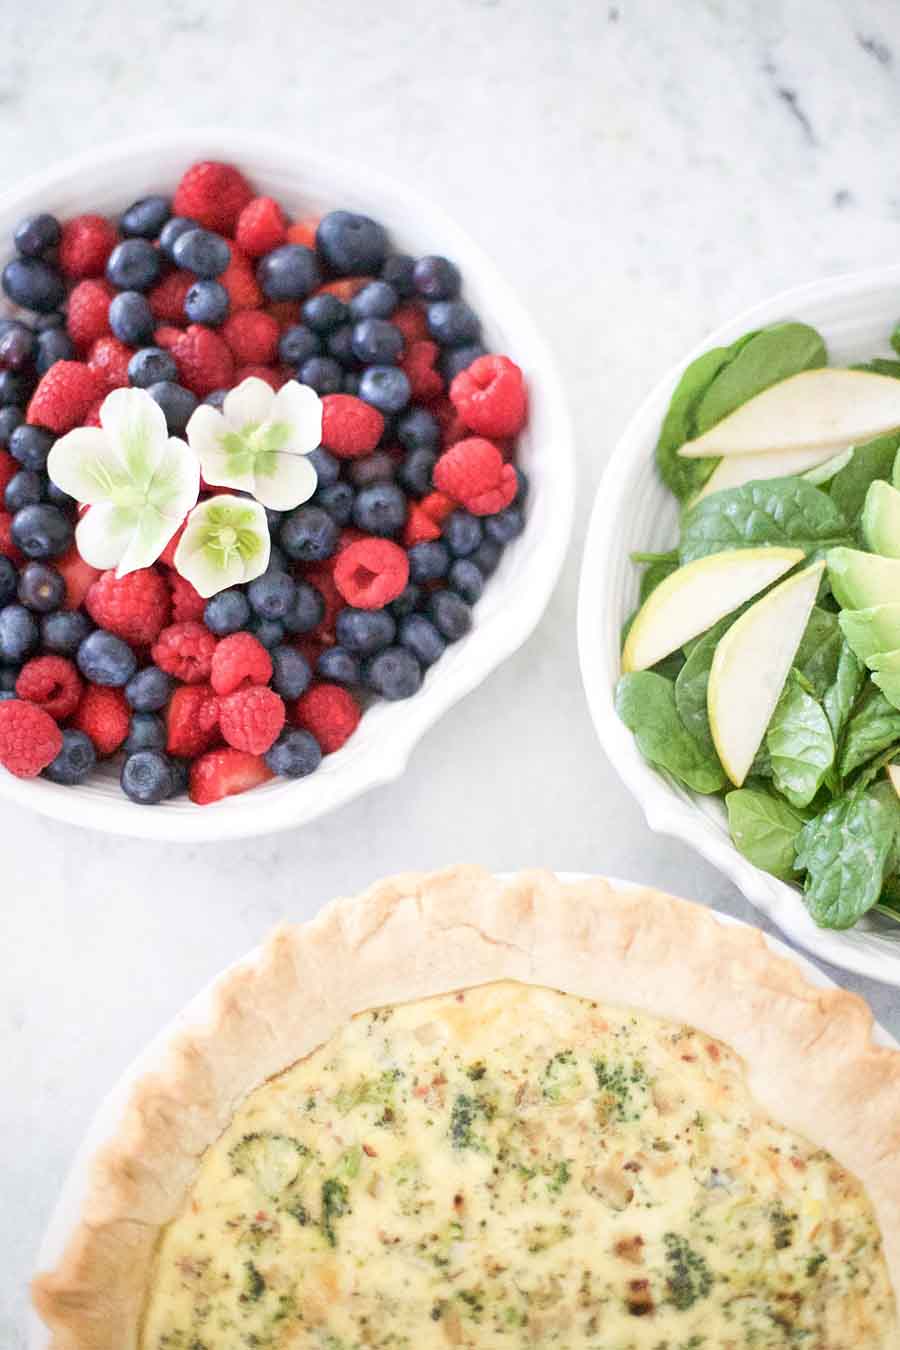 Quiche and berries on the table.